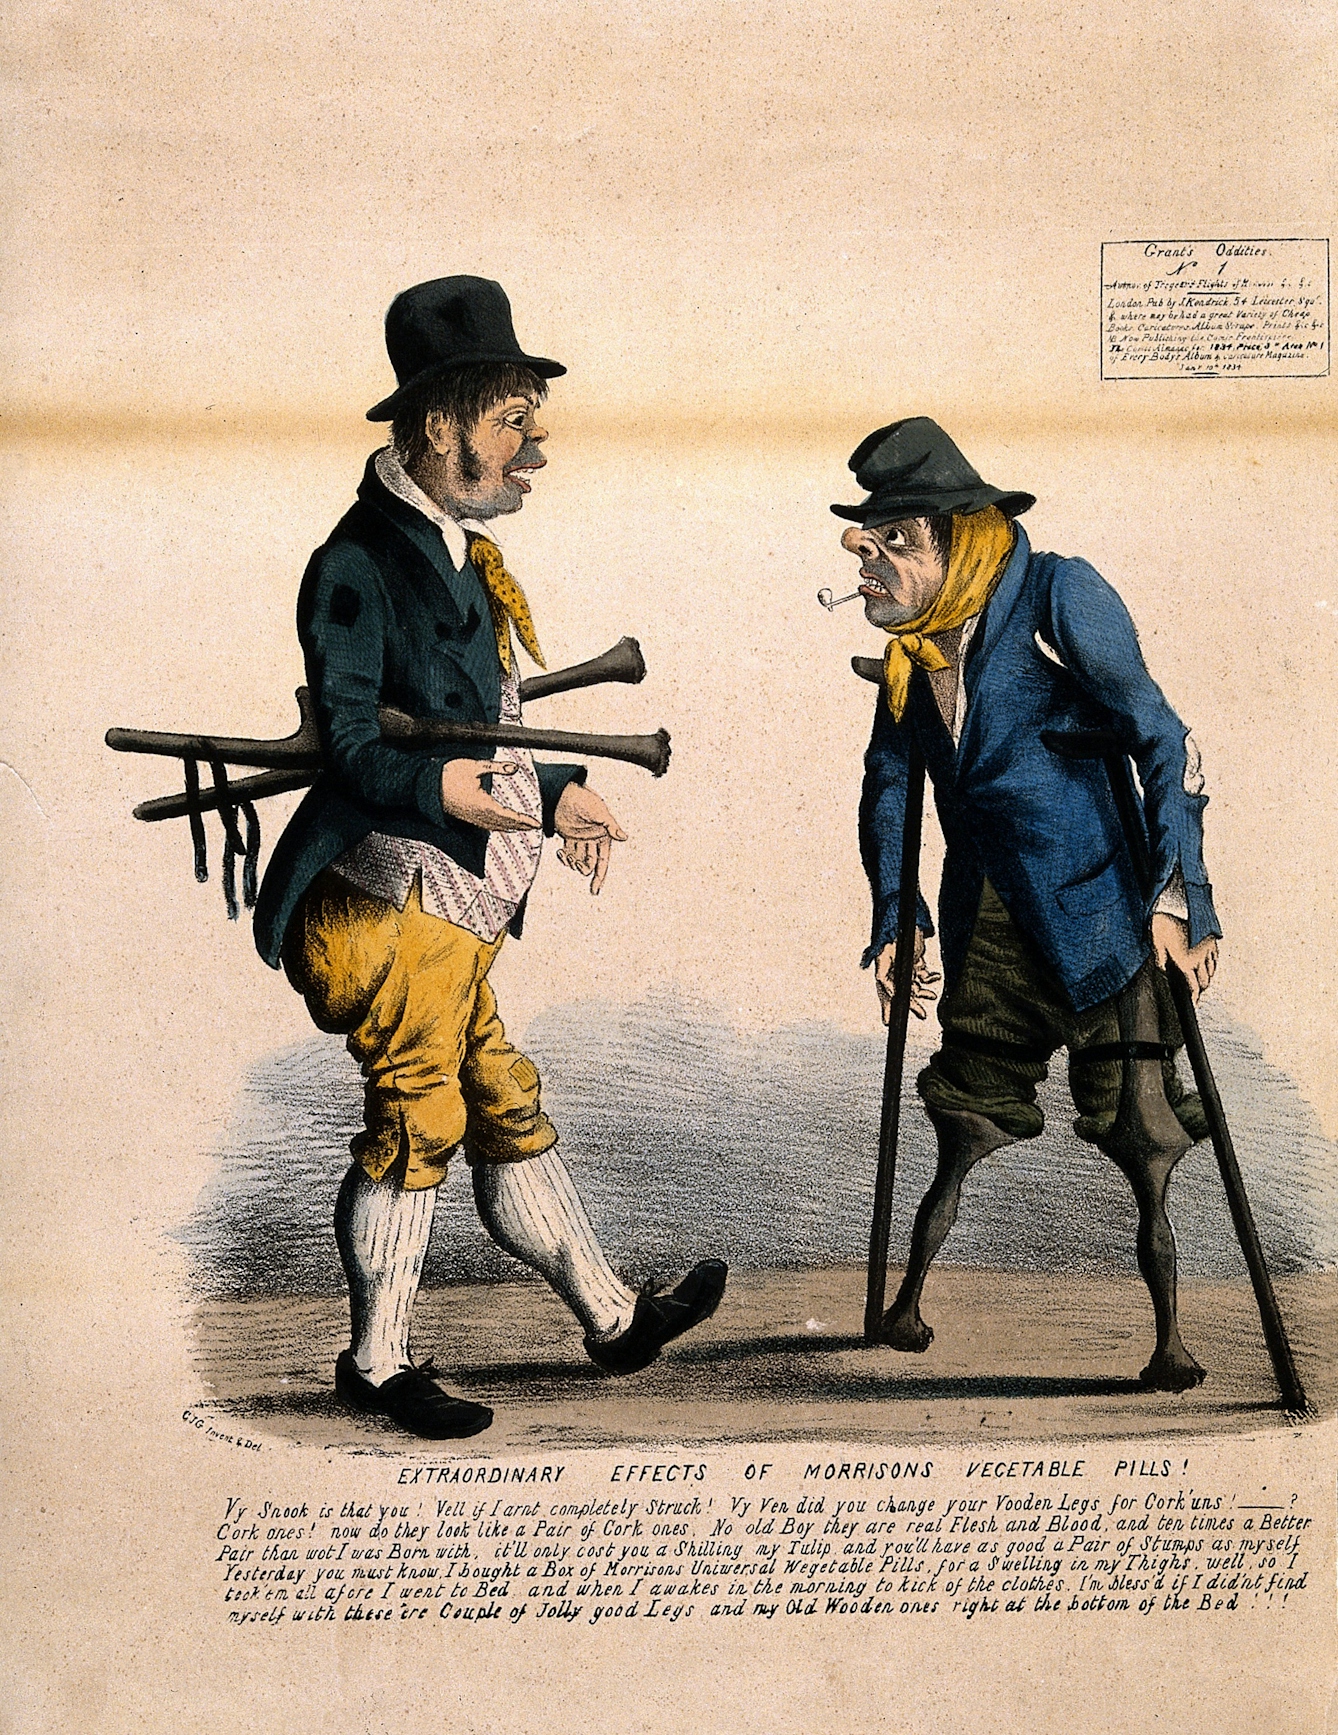 A man carrying a pair of wooden stumps under his arm talking to a a man on crutches and wooden stumps instead of legs